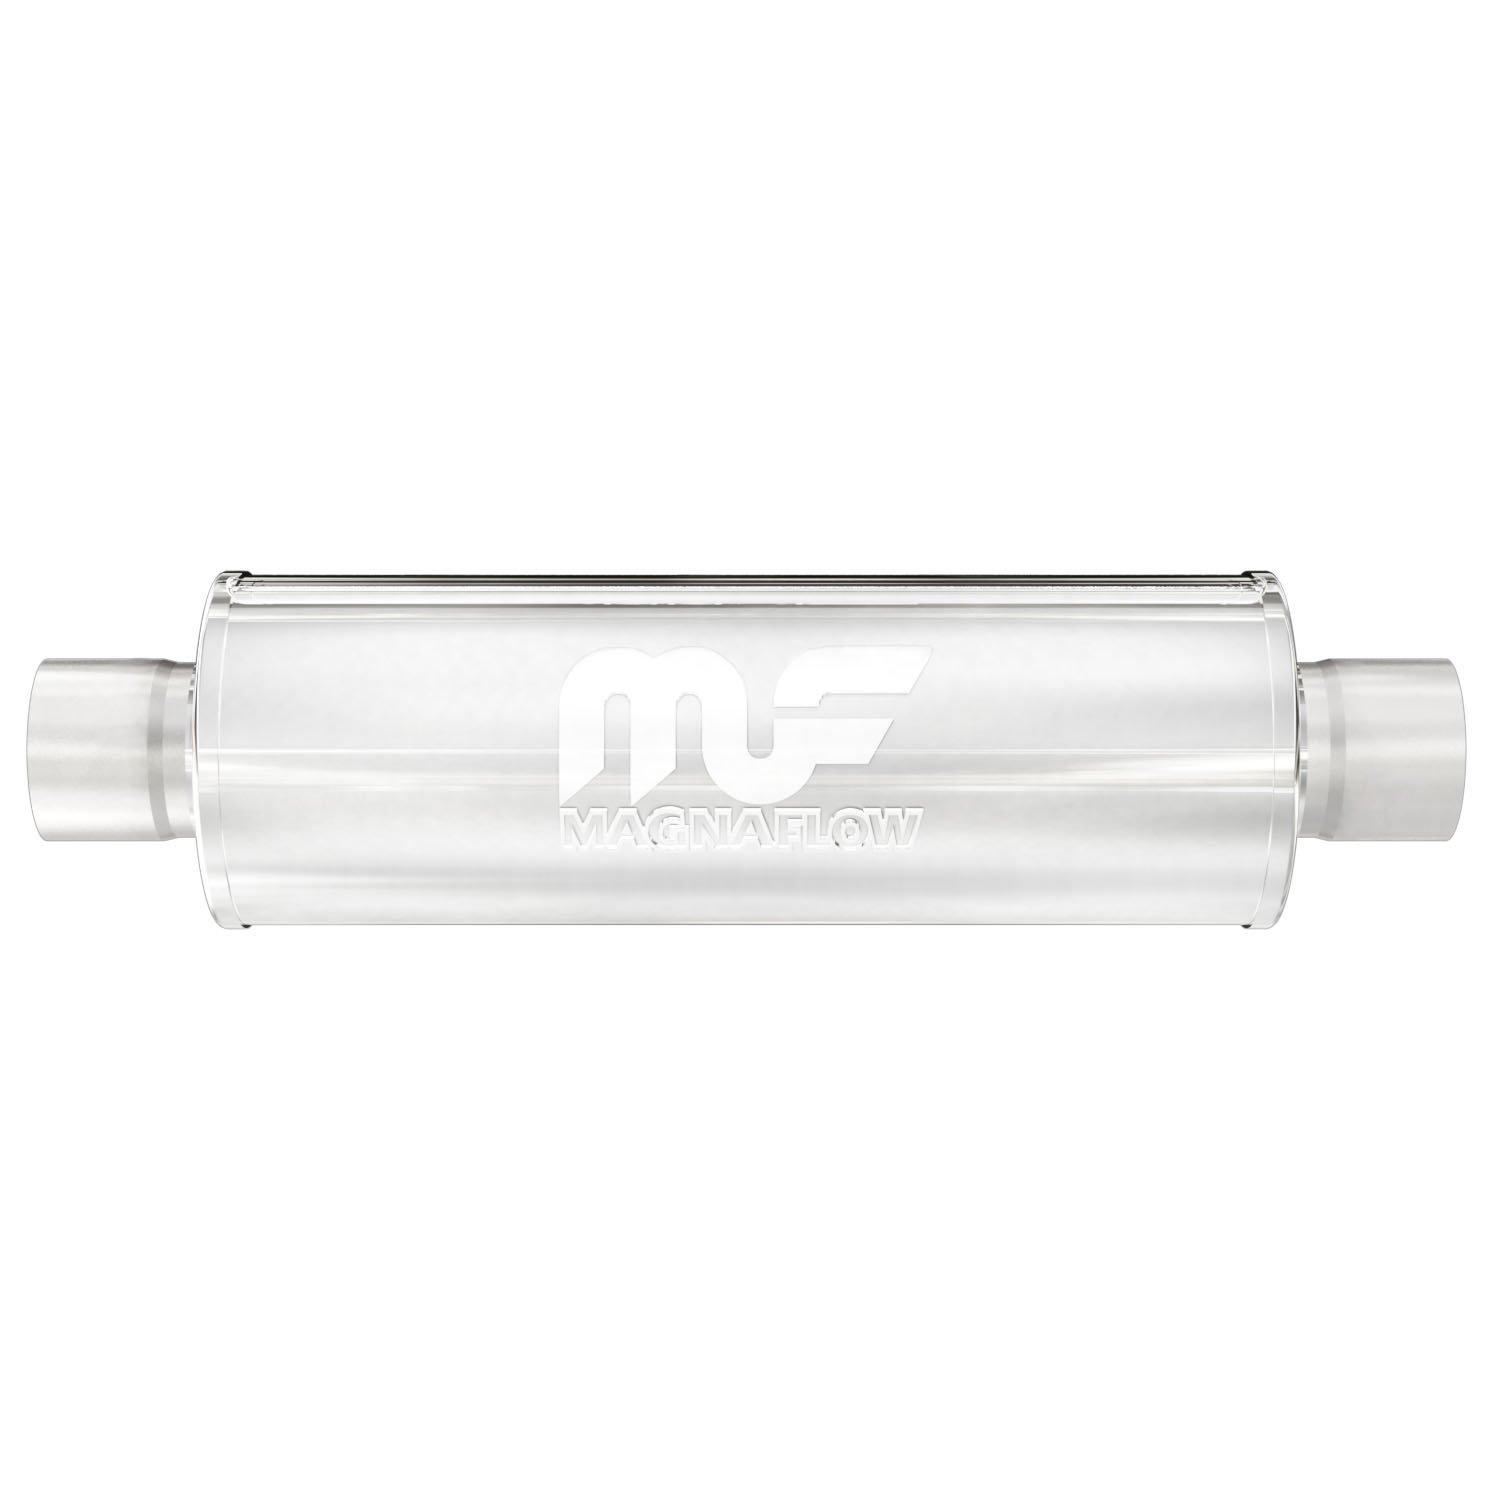 4" Round Muffler, Center In/Center Out: 2", Body Length: 14" Overall Length: 20" Core Size: 2" [Brushed Finish]